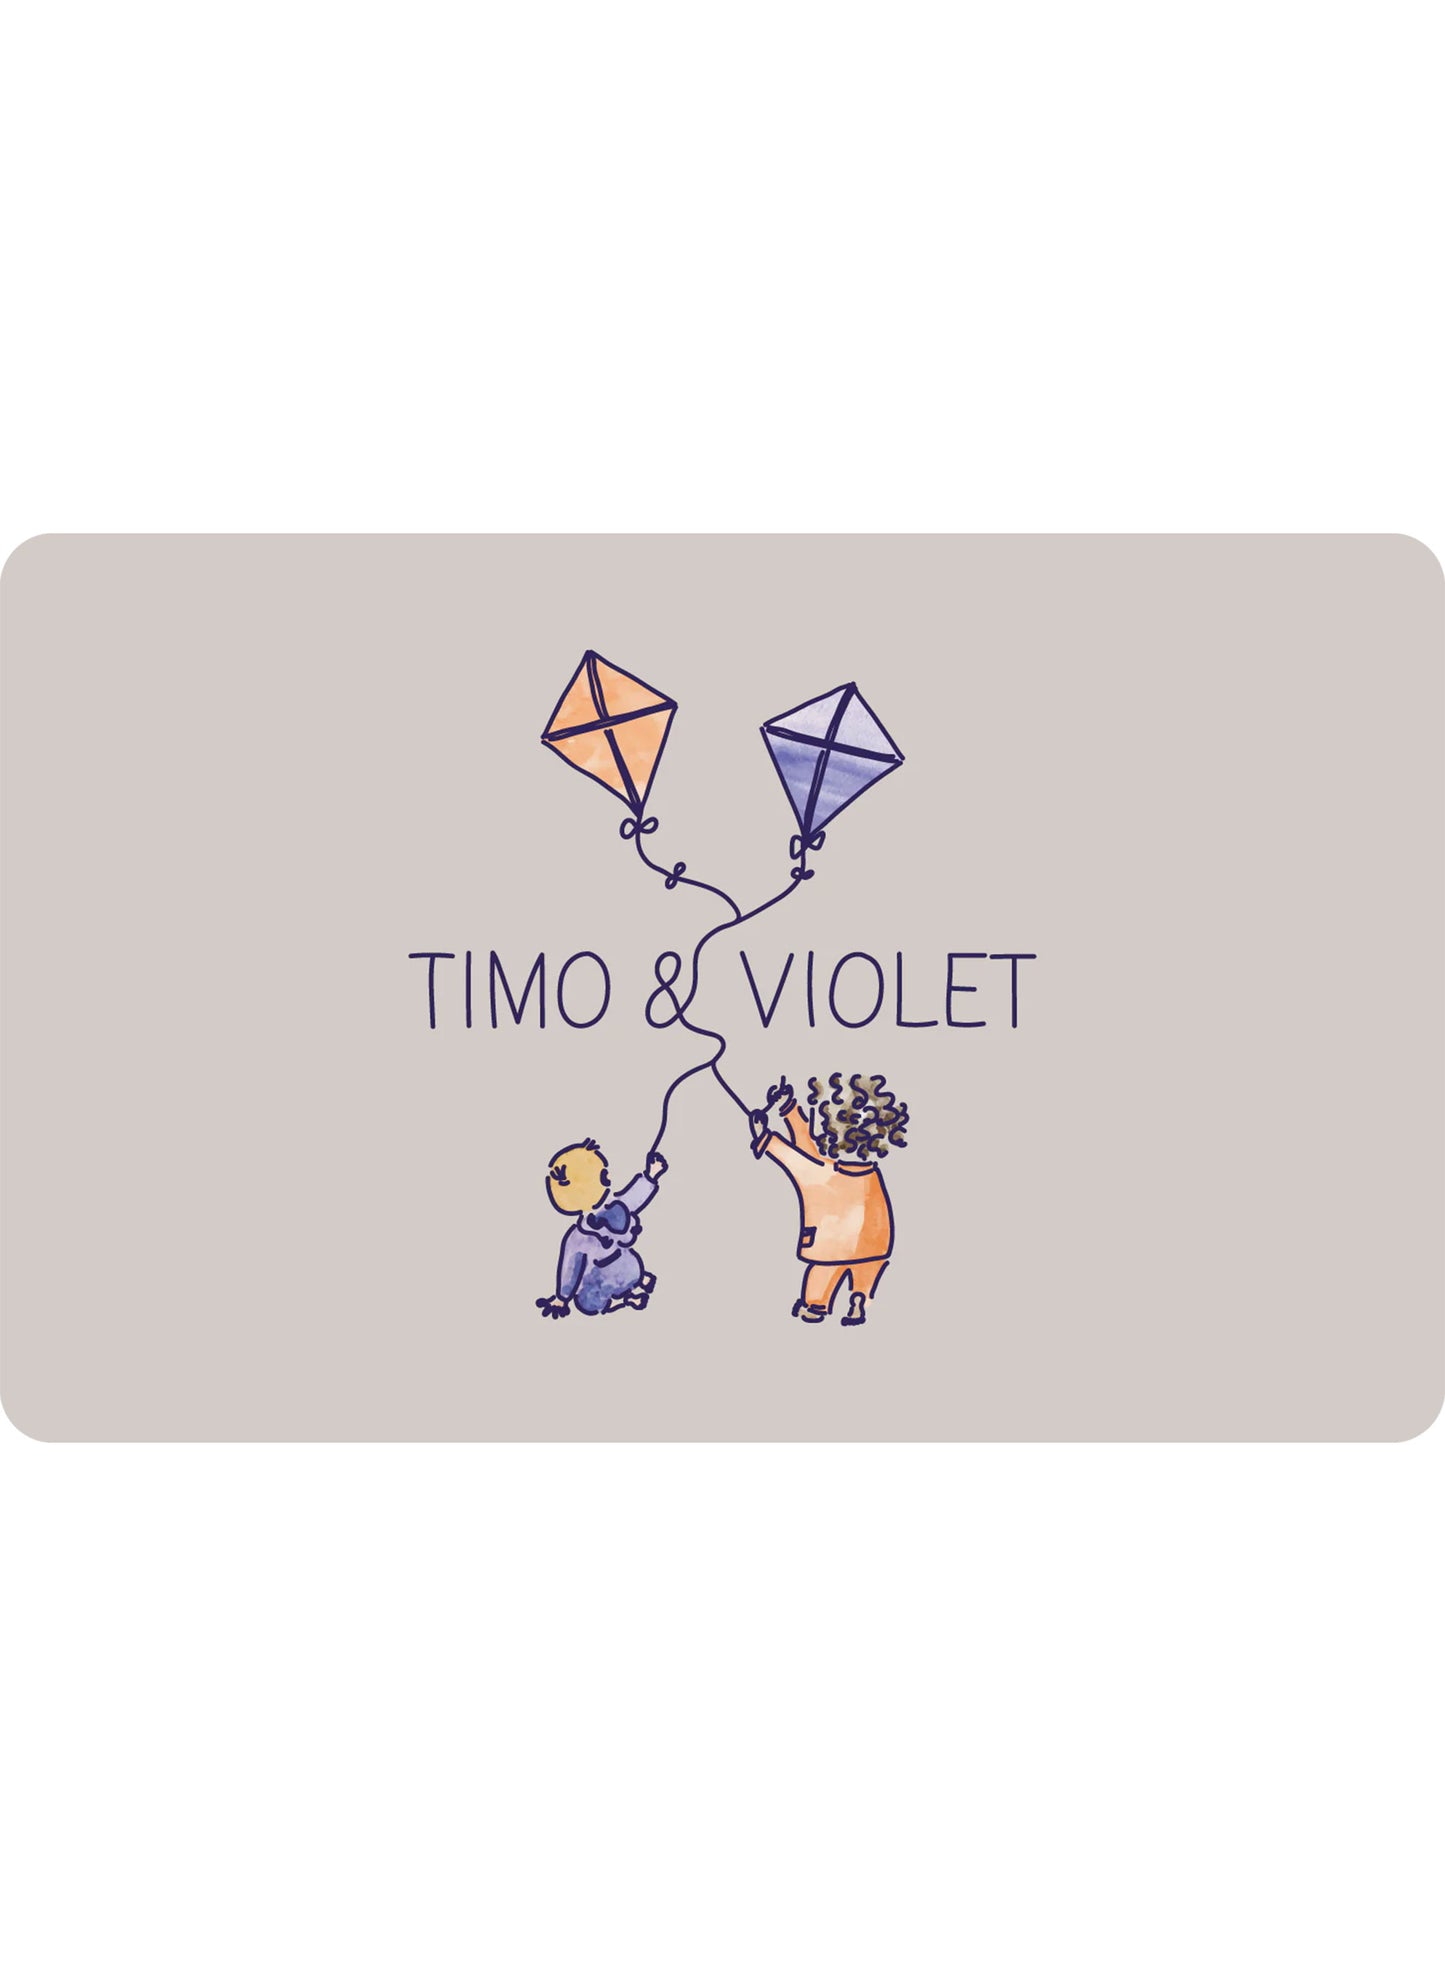 Timo & Violet Gift Card